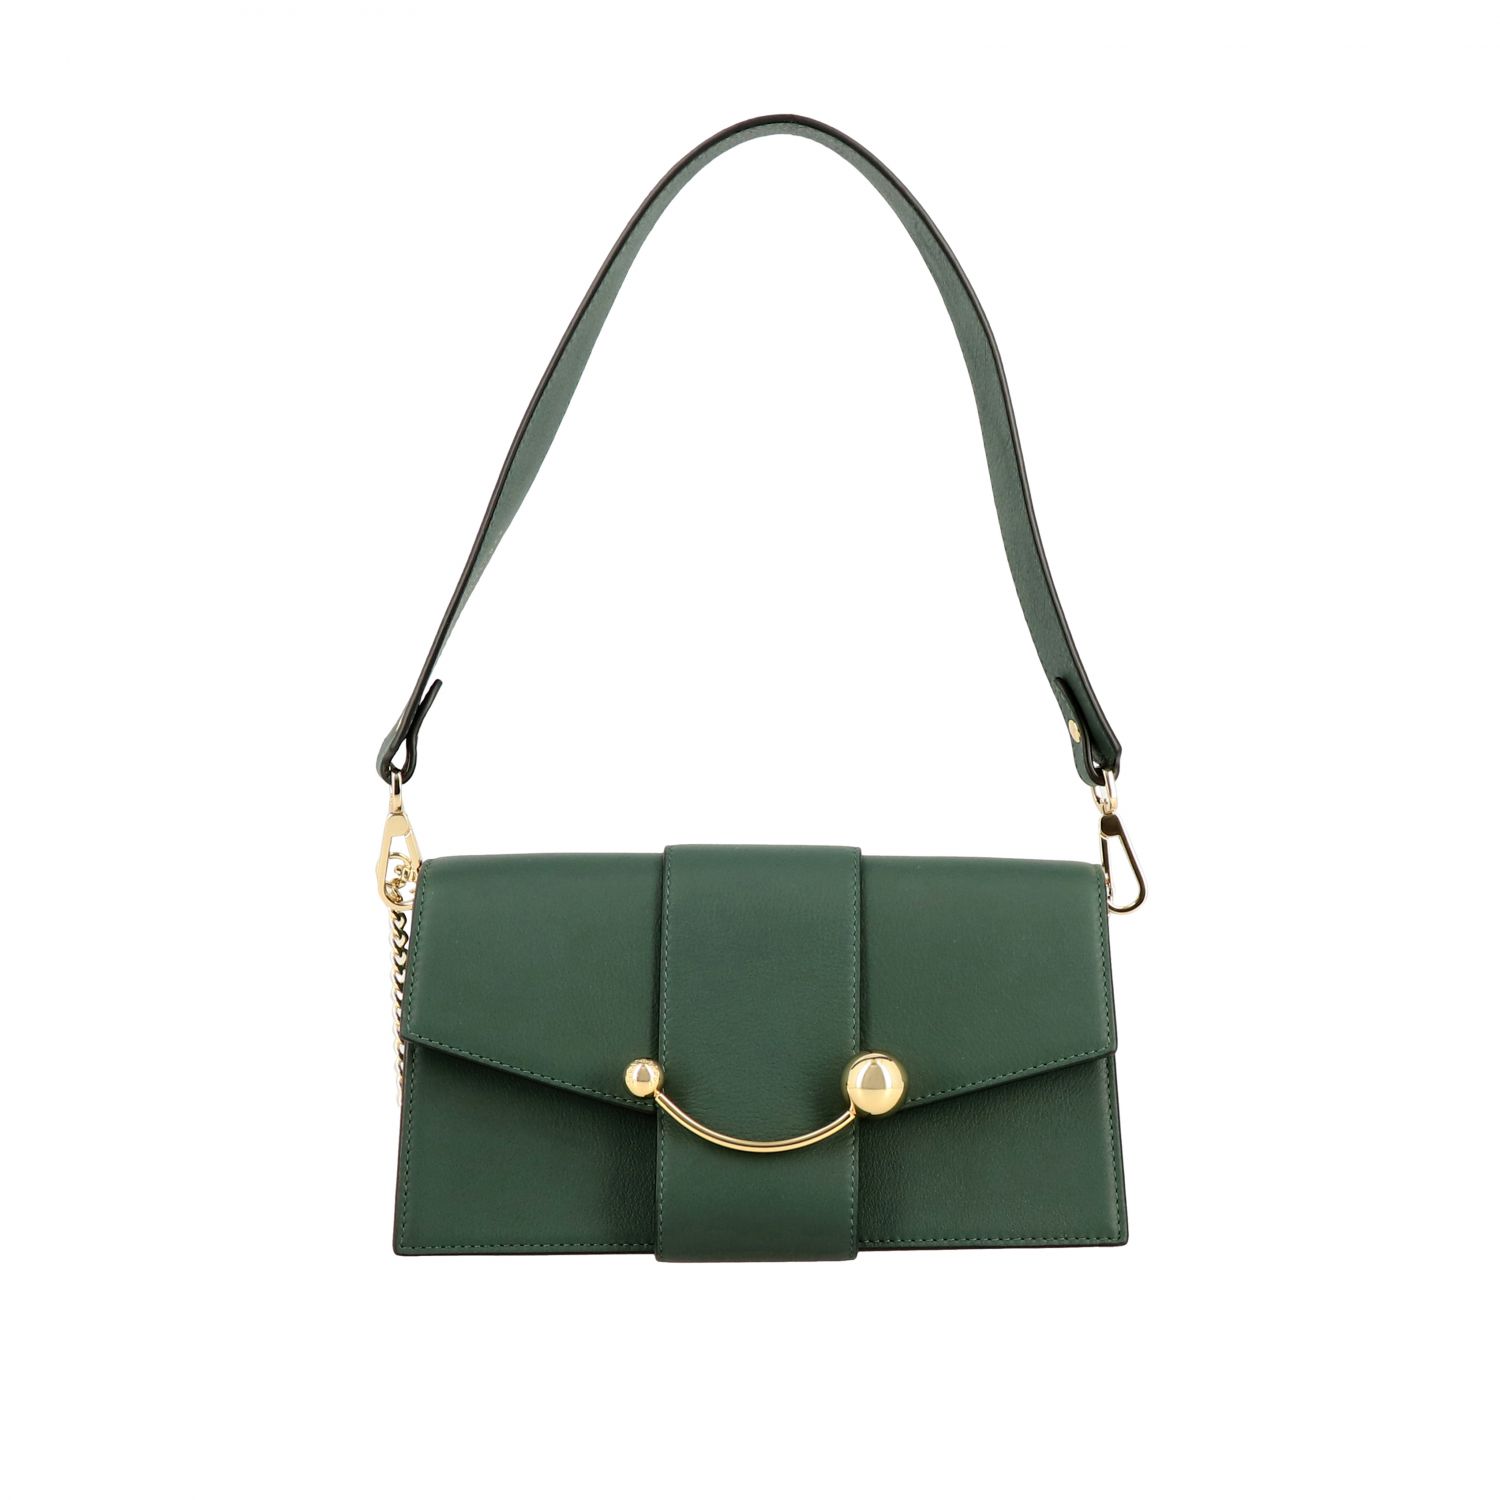 STRATHBERRY: Mini crescent leather shoulder bag - Green | Strathberry ...